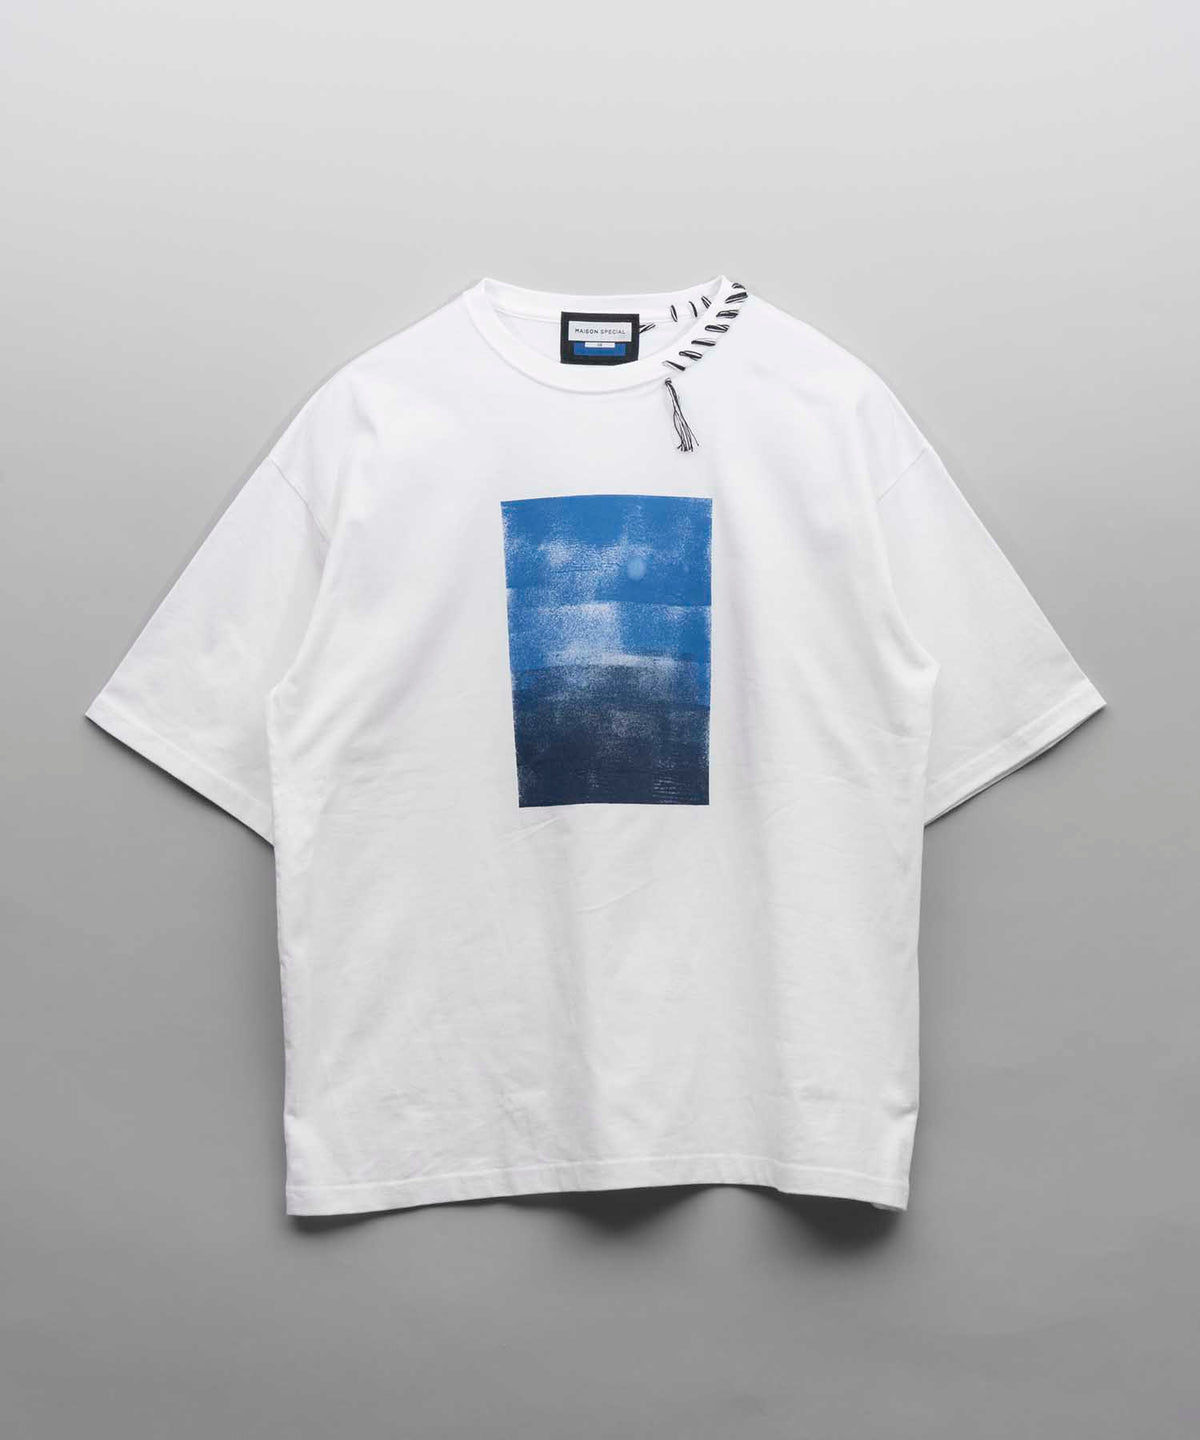 【PRE-ORDER】Abstract Hand-Printed Oversized Stitched Crew Neck T-shirt